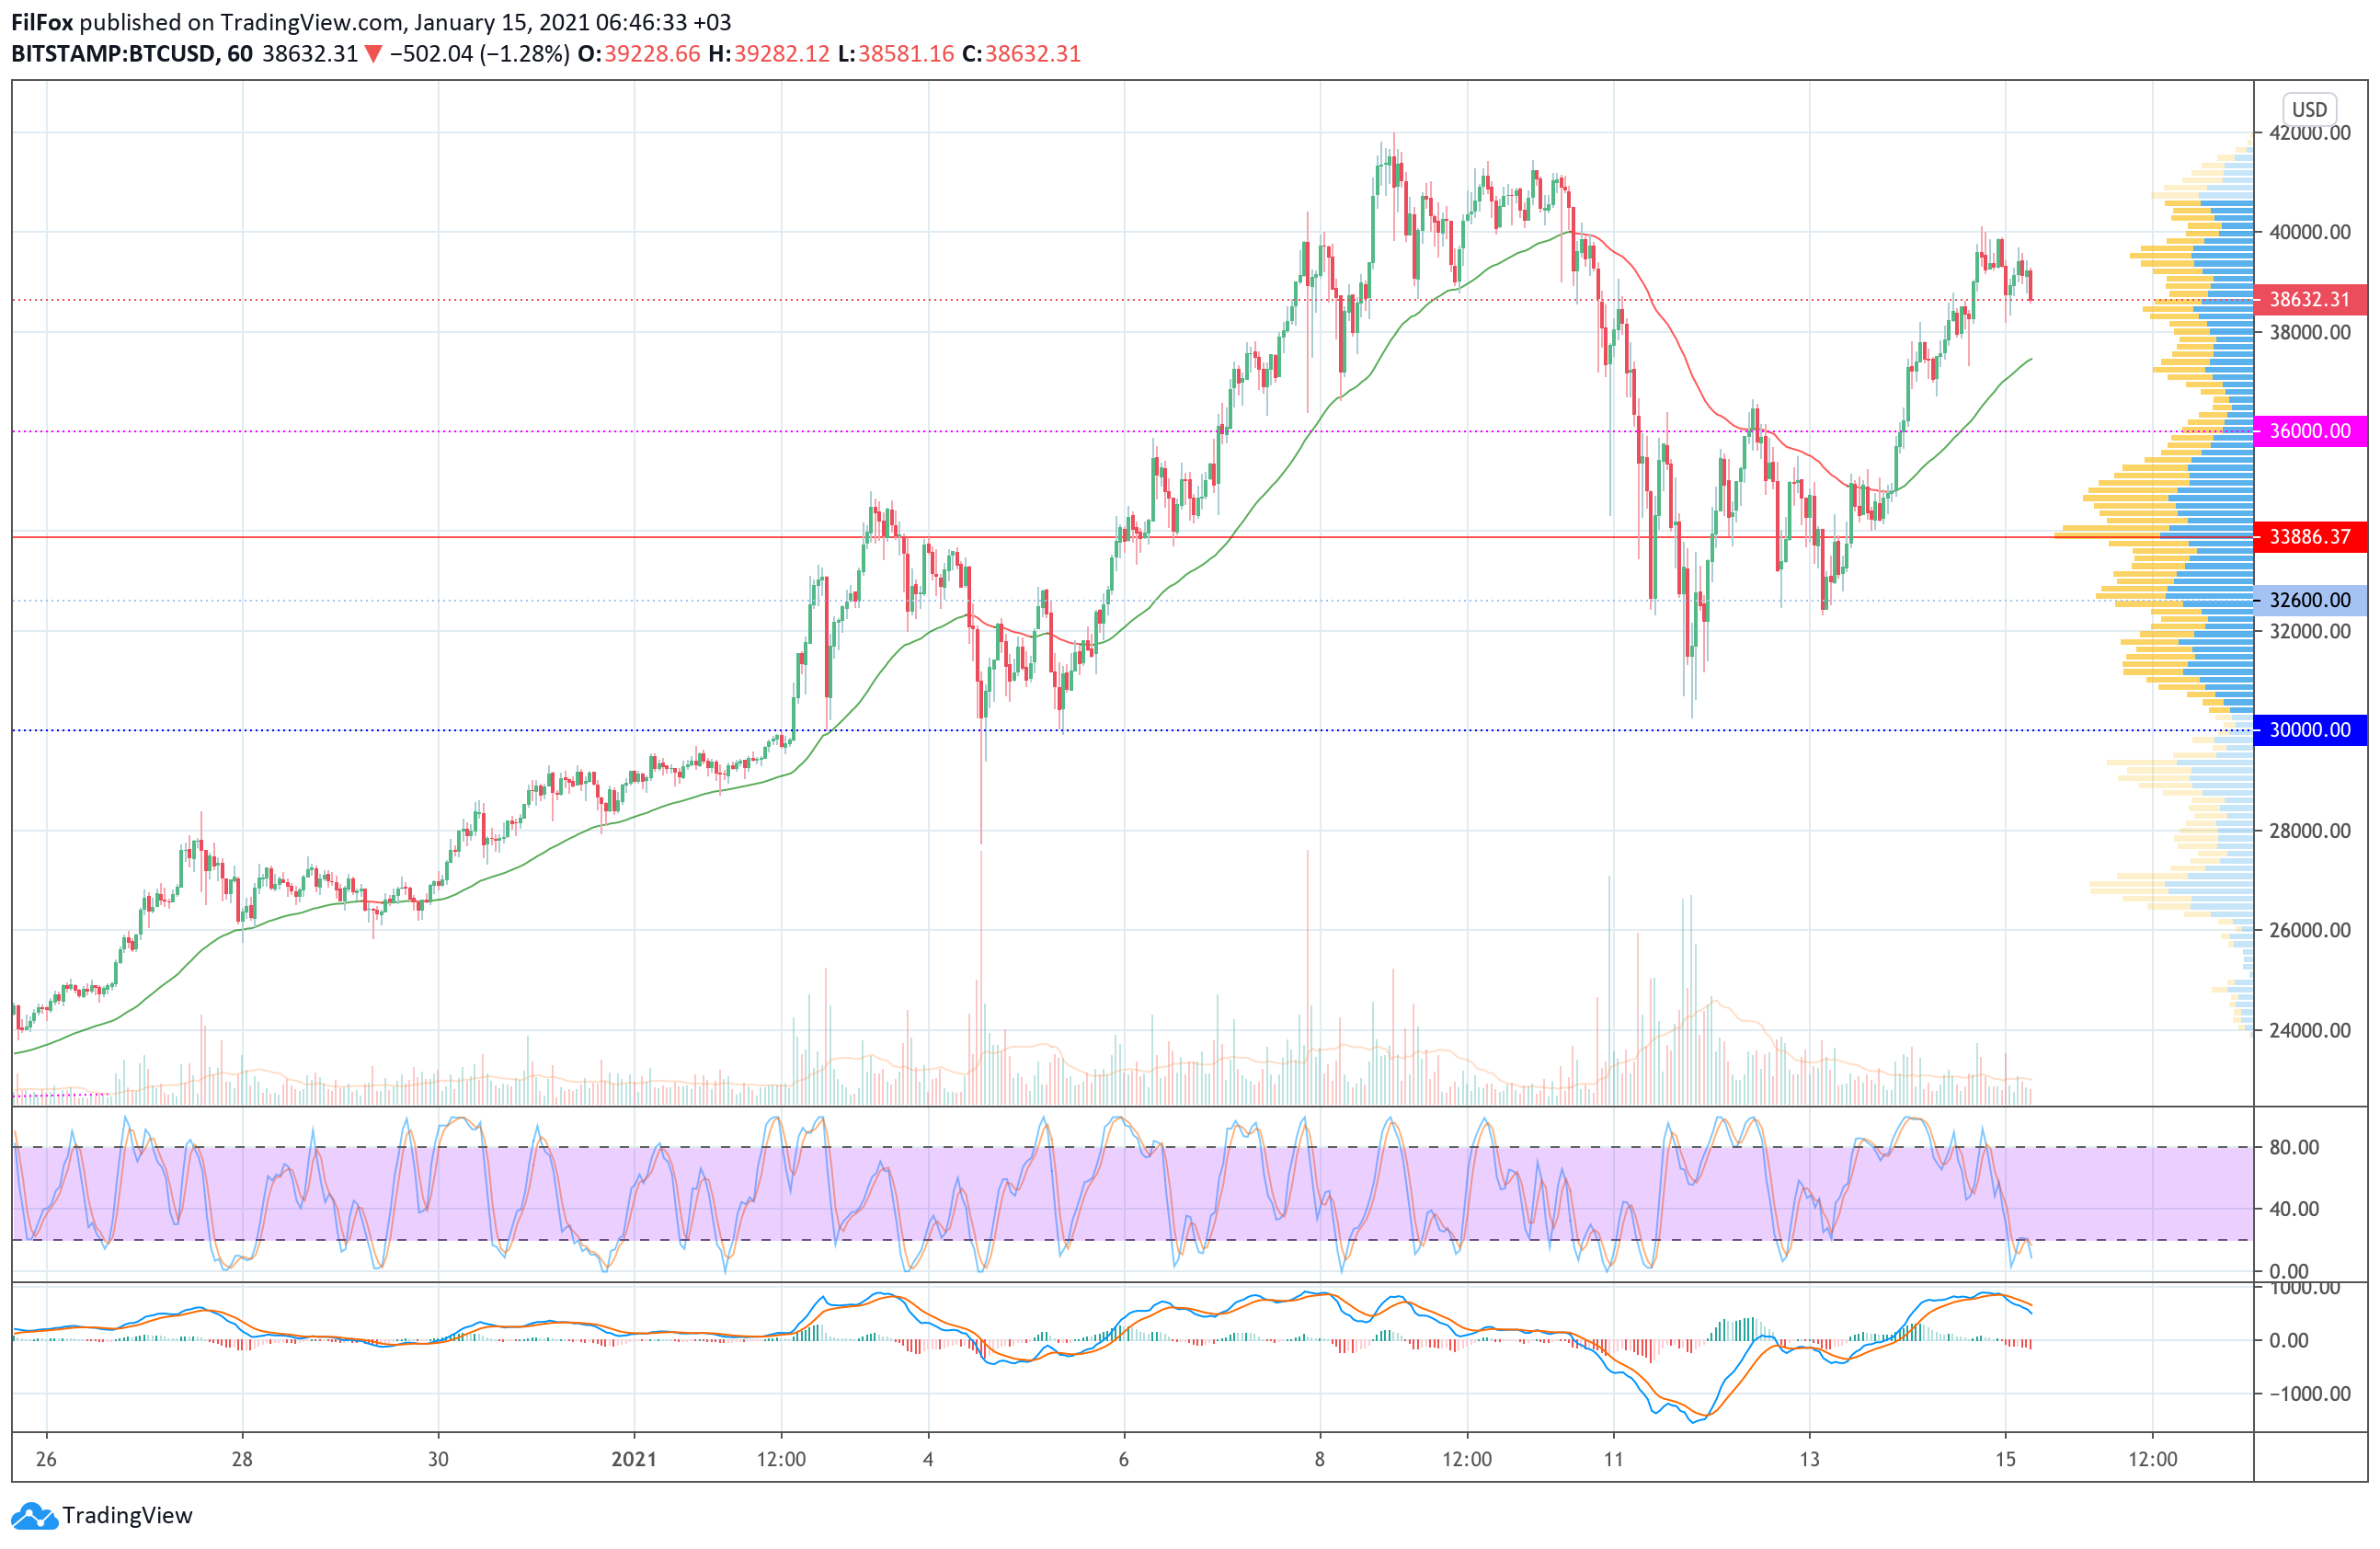 Analysis of prices for Bitcoin, Ethereum, Ripple for 01/15/2021